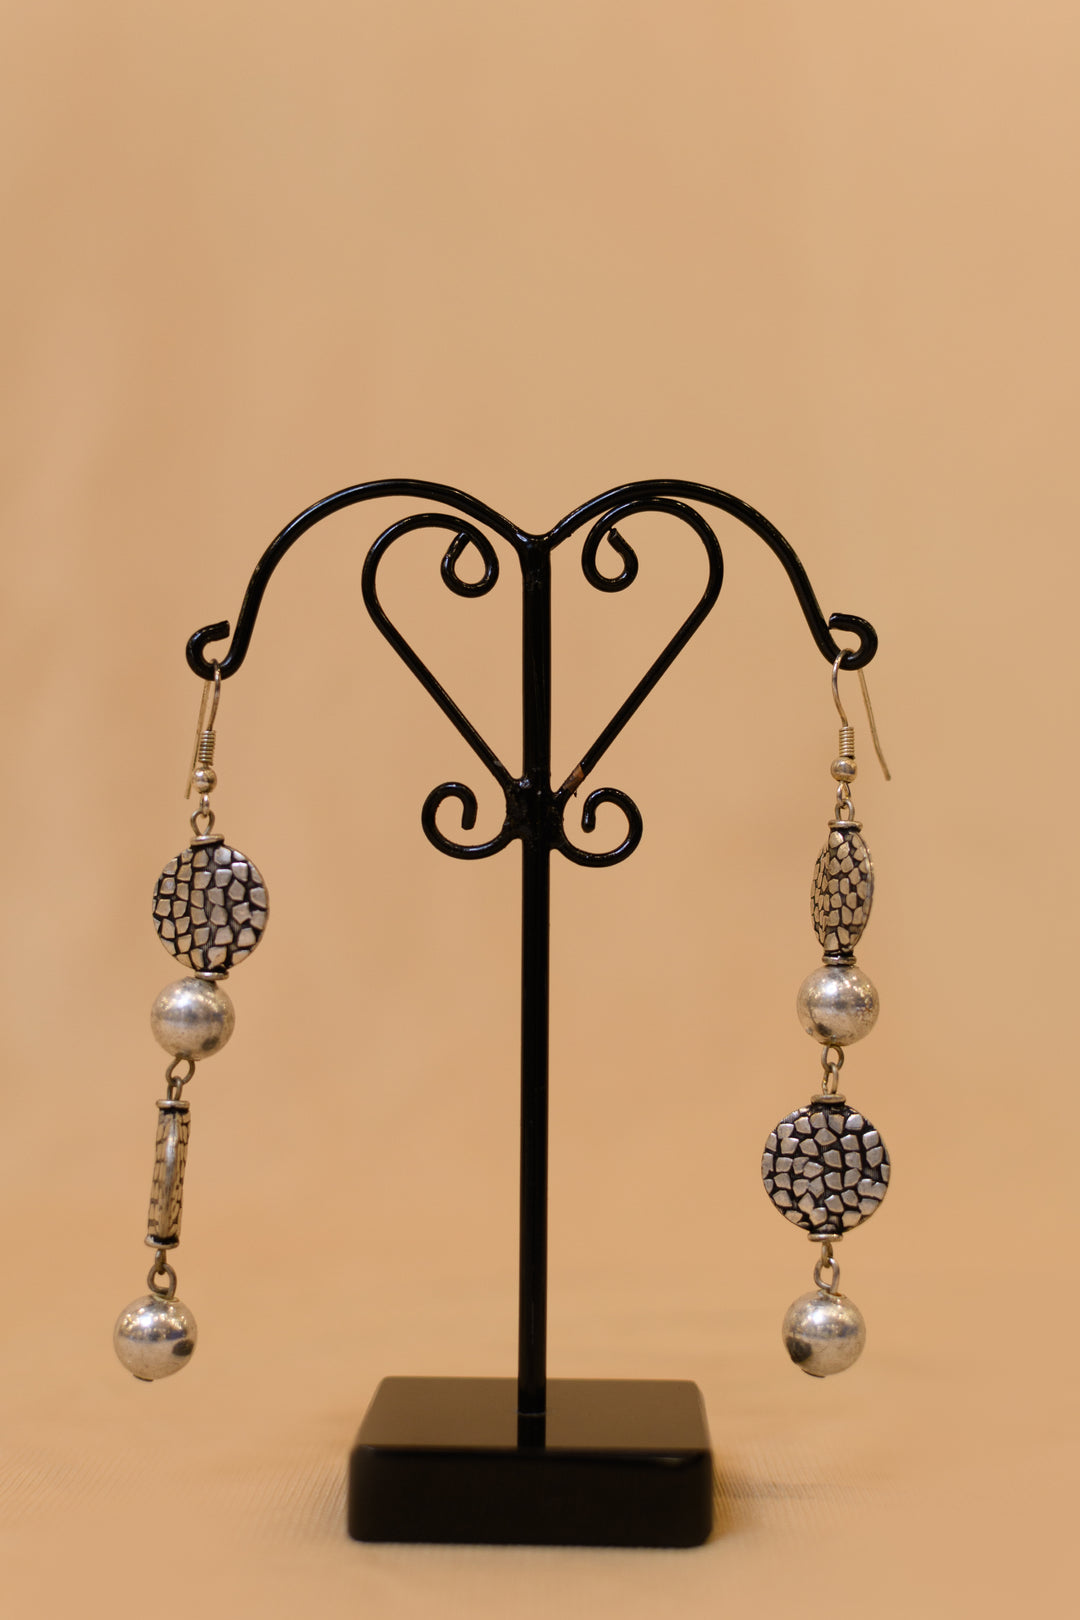 Double Layered Metal Beads Earings With Beads Having Metal Polish On Them